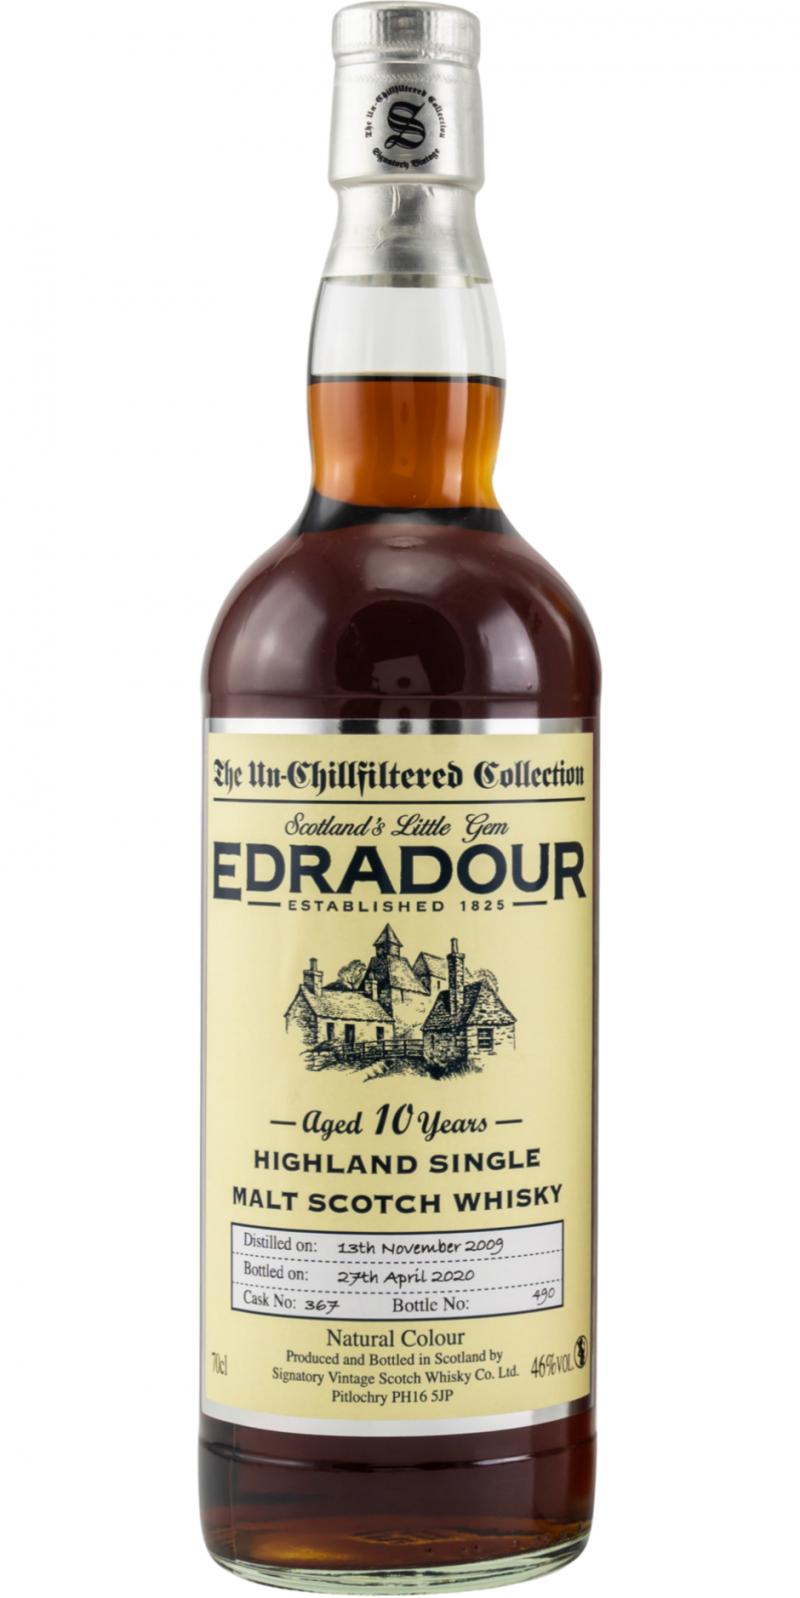 Edradour 2009 SV The Un-Chillfiltered Collection Sherry Cask #367 46% 700ml